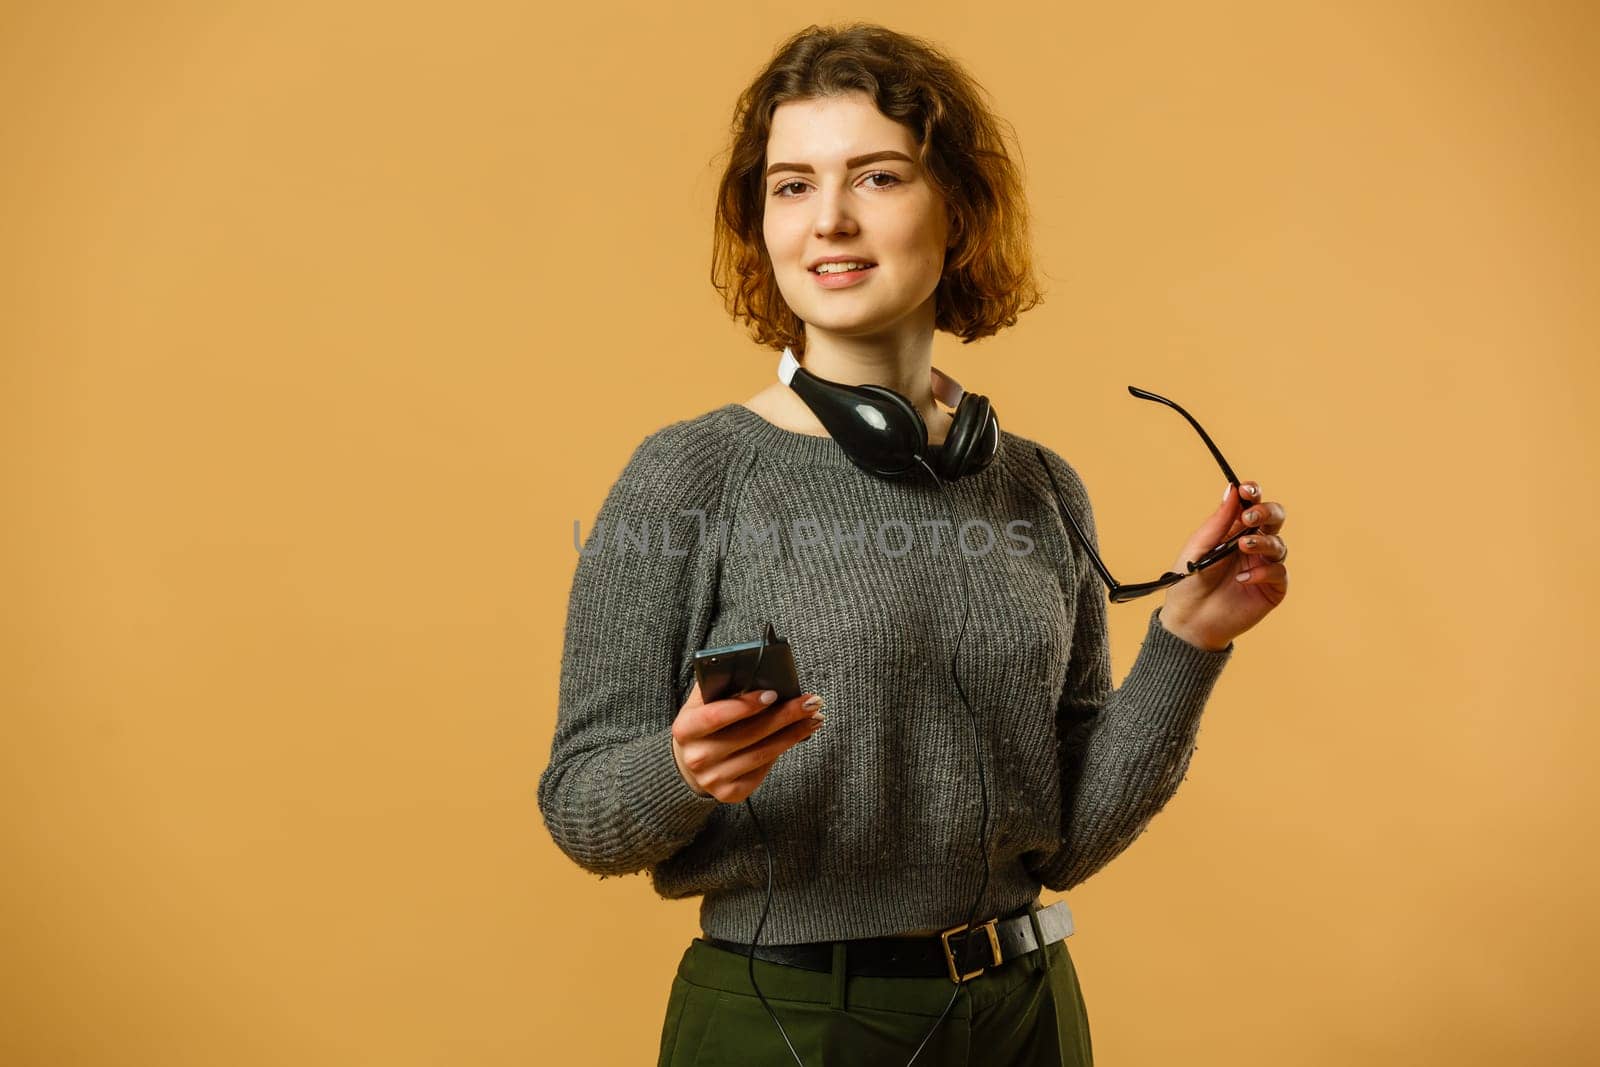 Smiling woman listening music in headphones and using smartphone over yellow background.